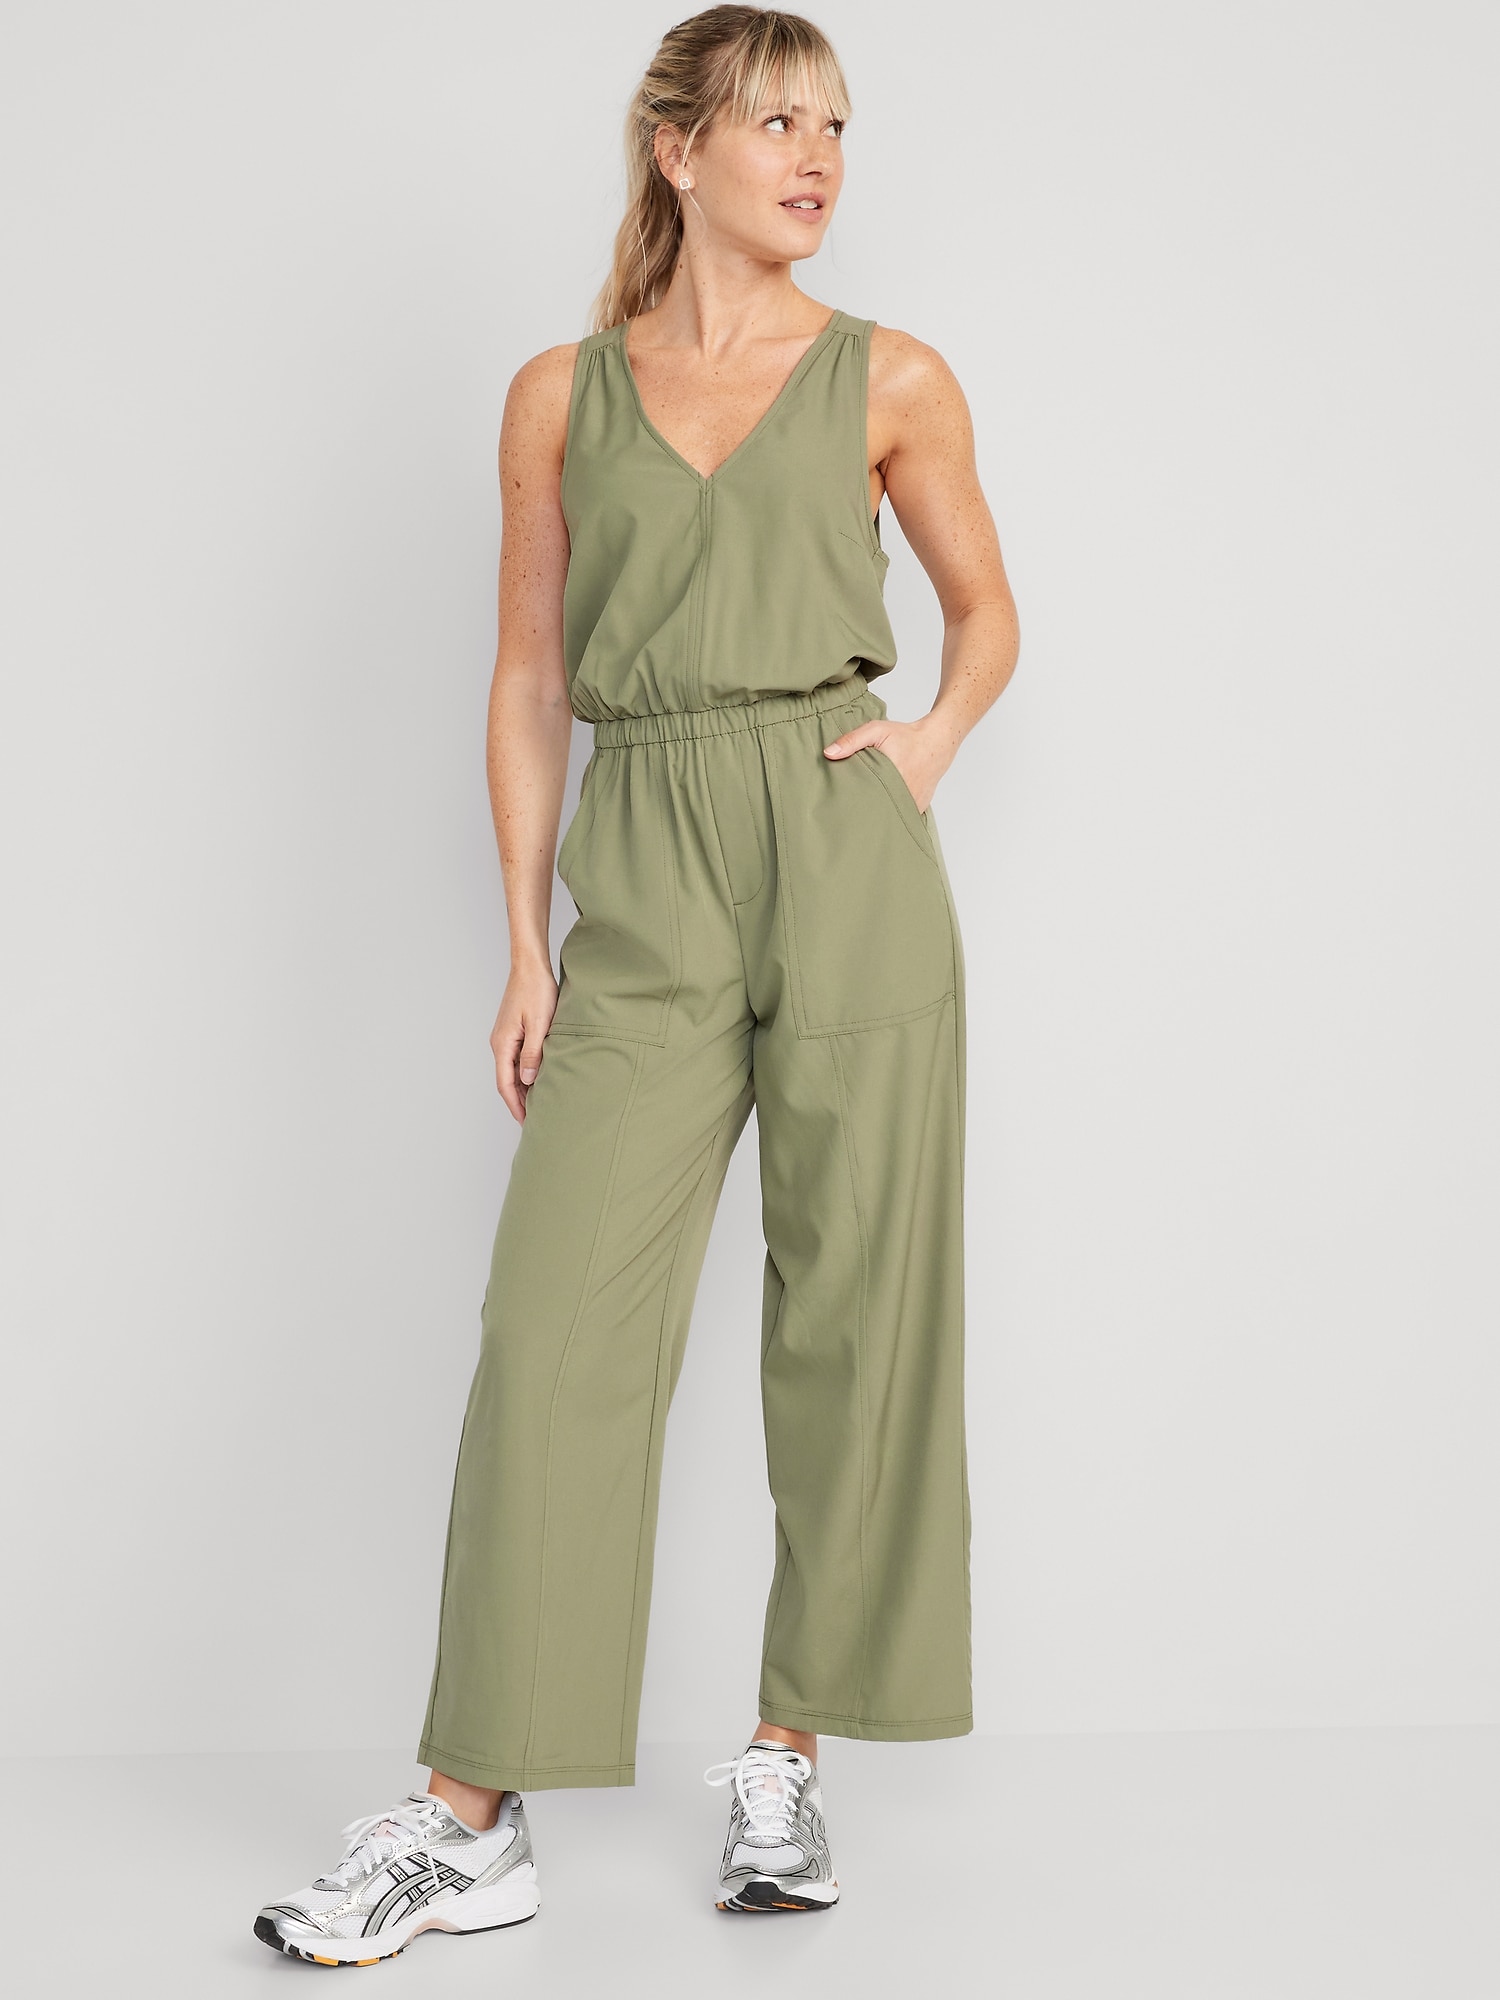 Old Navy - Sleeveless Double-Strap Ankle-Length Jumpsuit for Women green